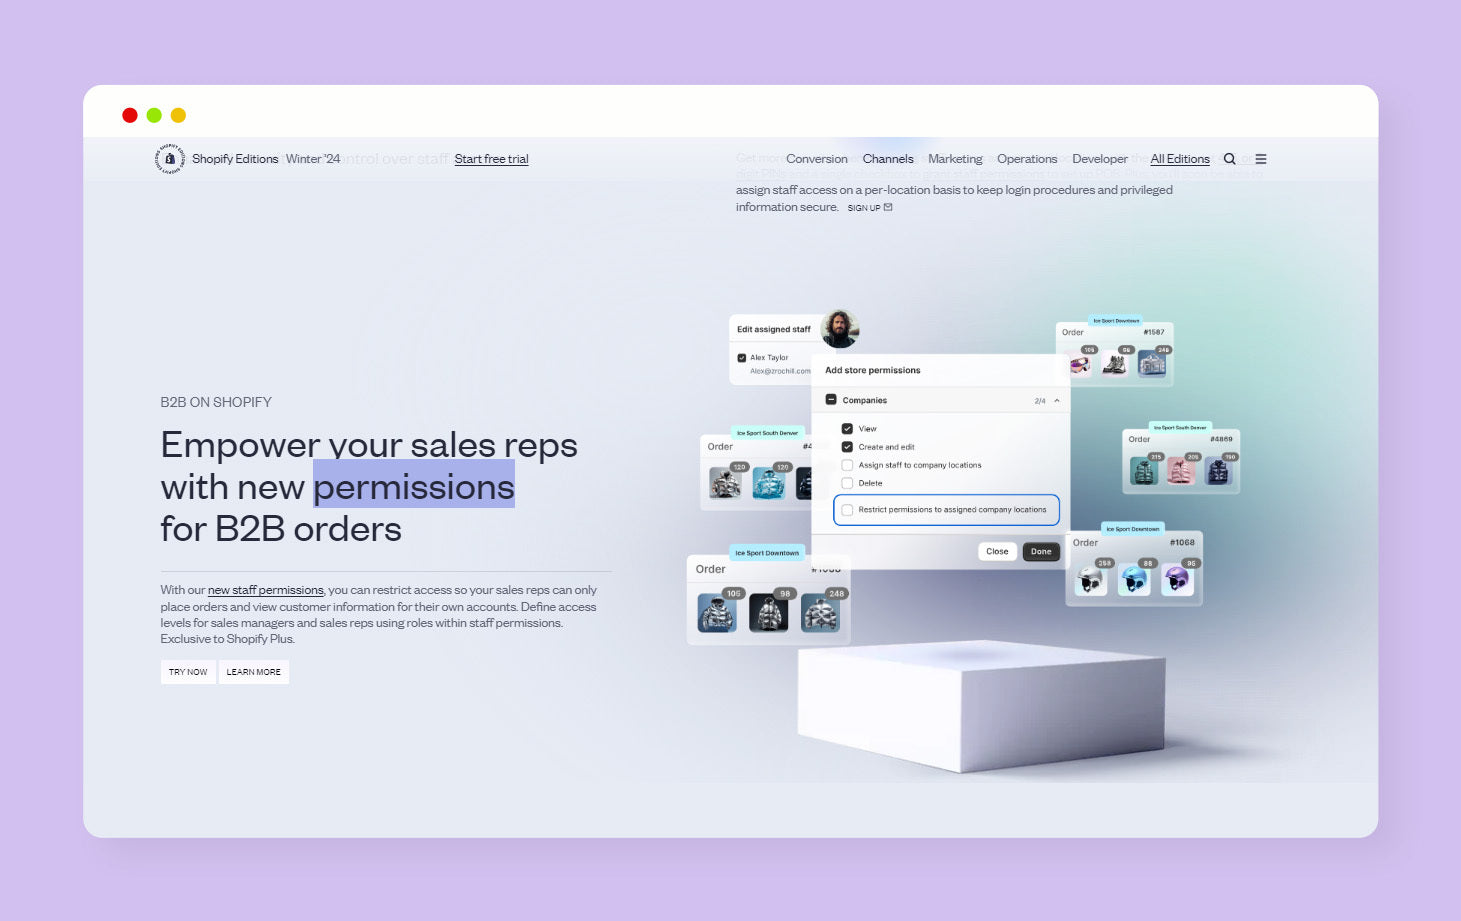 Shopify Editions Winter ‘24: Empowering Shopify B2B E-Commerce Businesses